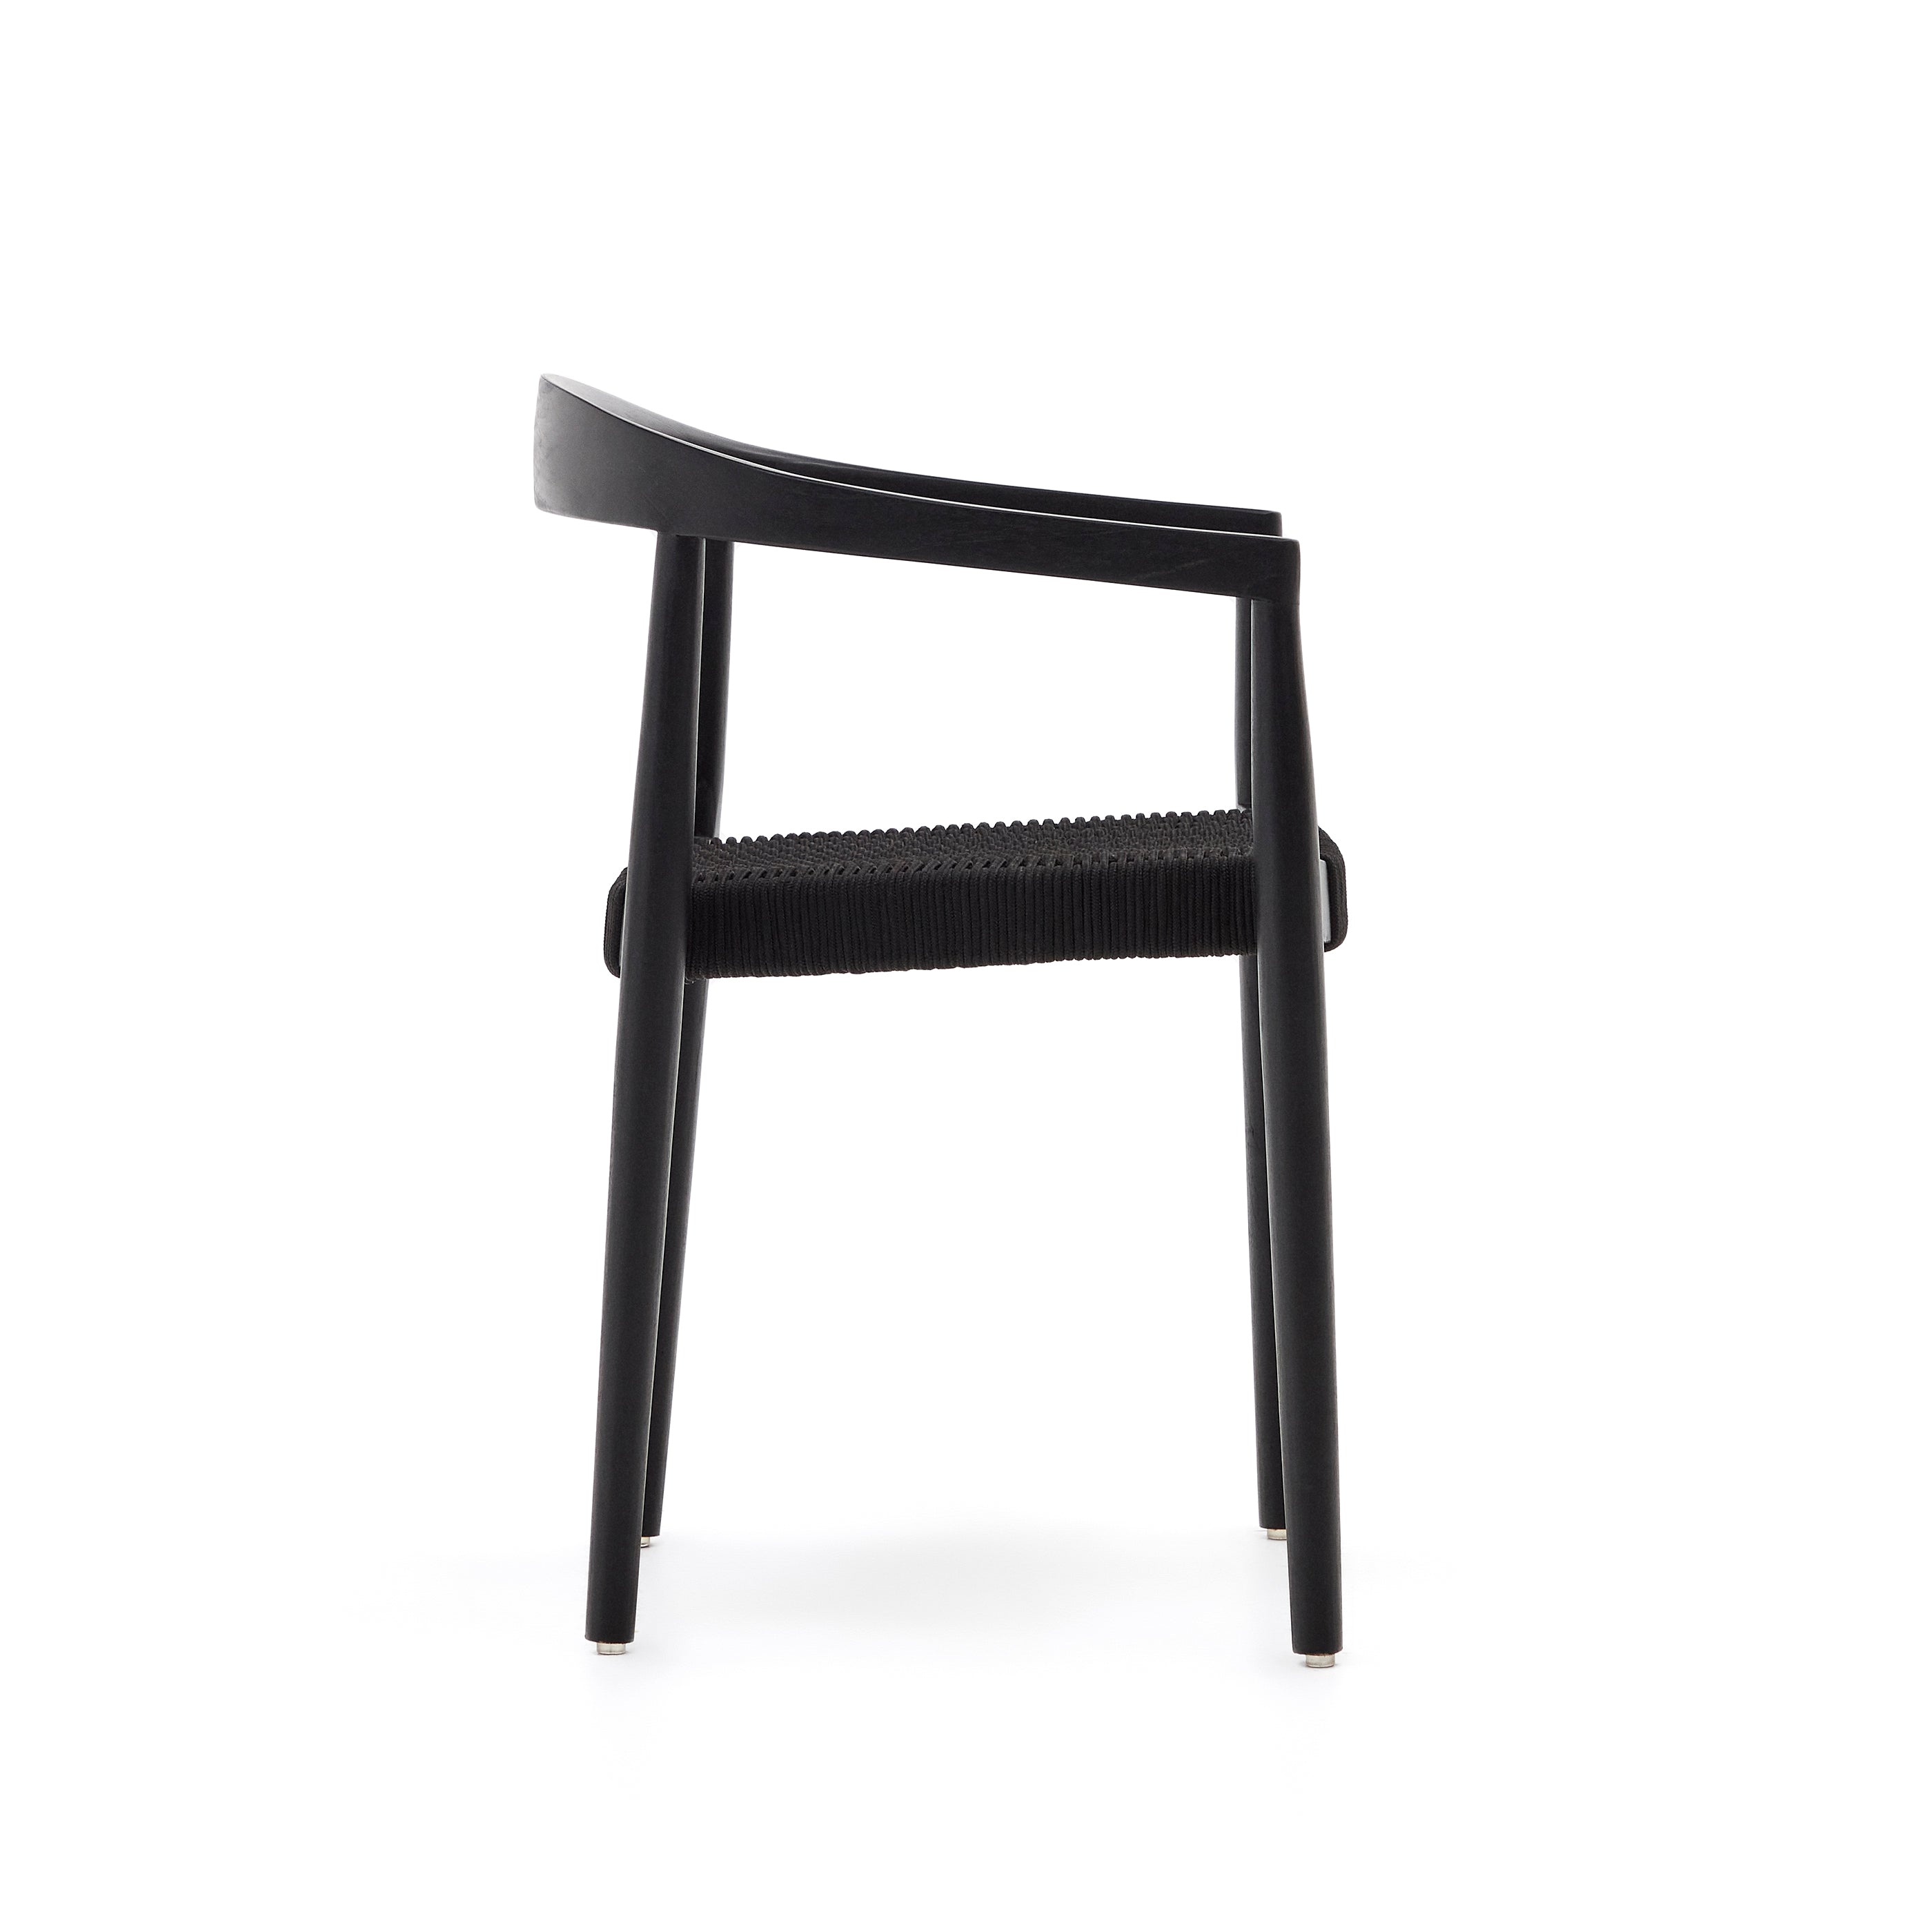 Ydalia stackable outdoor chair in solid teak wood with black finish and black rope